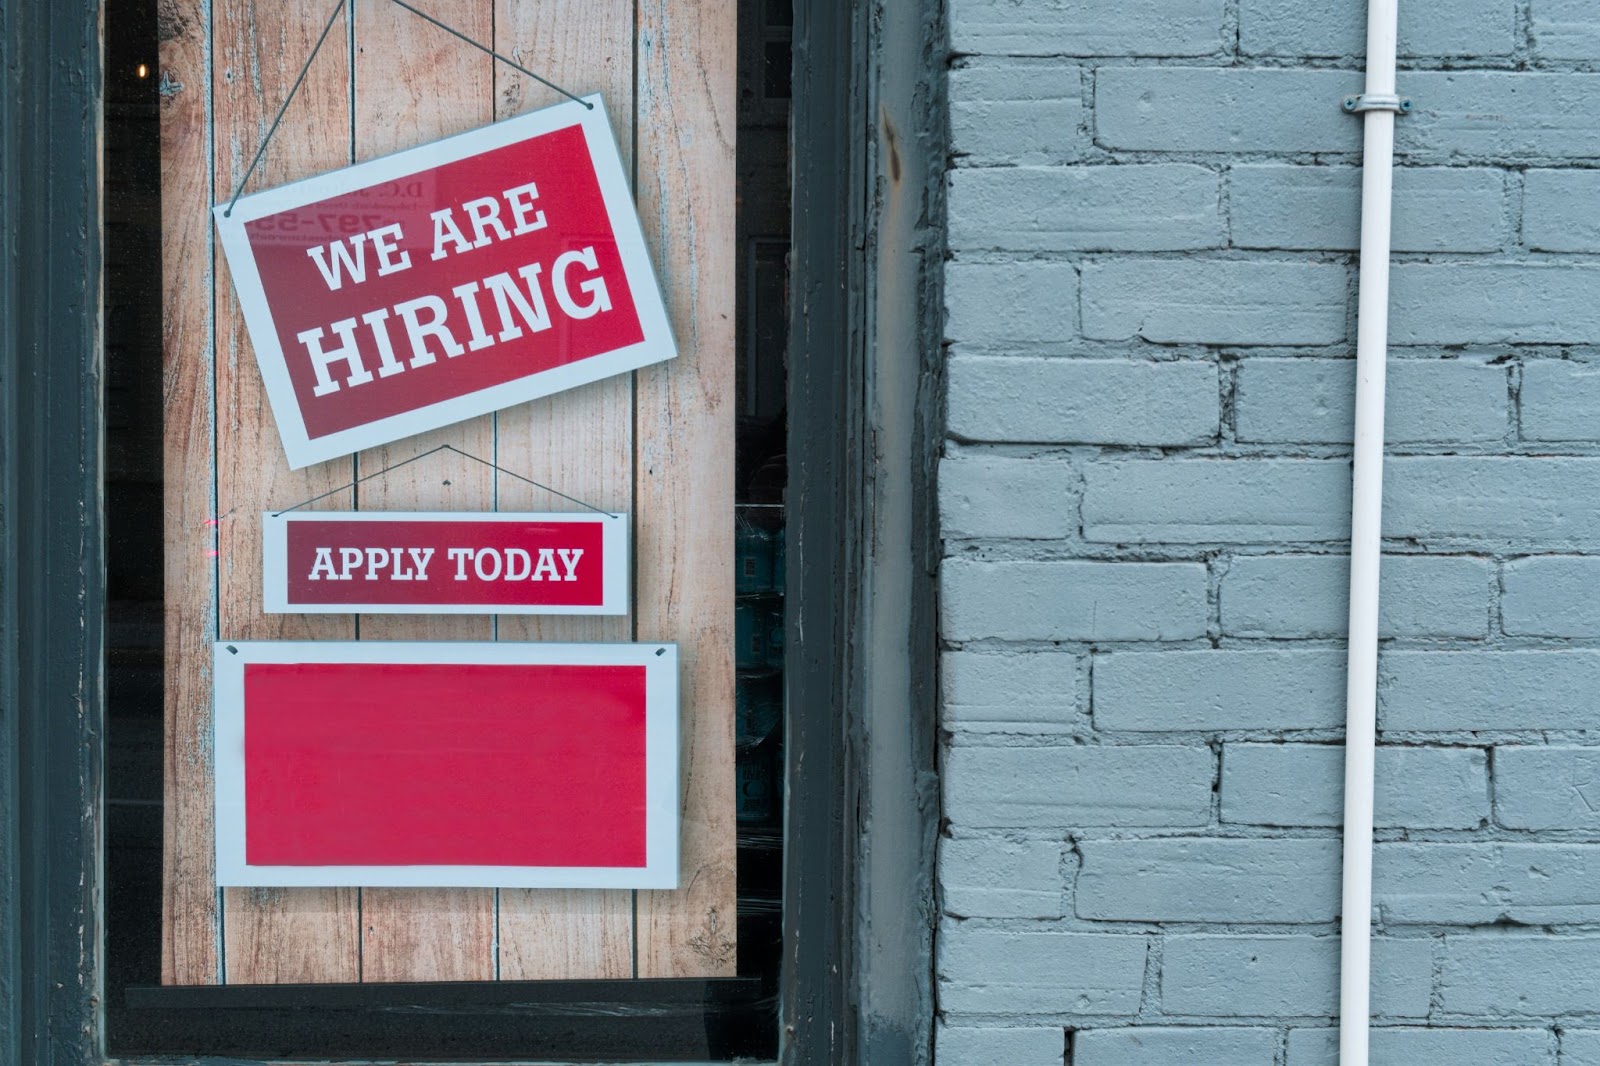 We are hiring & apply today signs hanging on a door next to a gray, painted, brick wall.